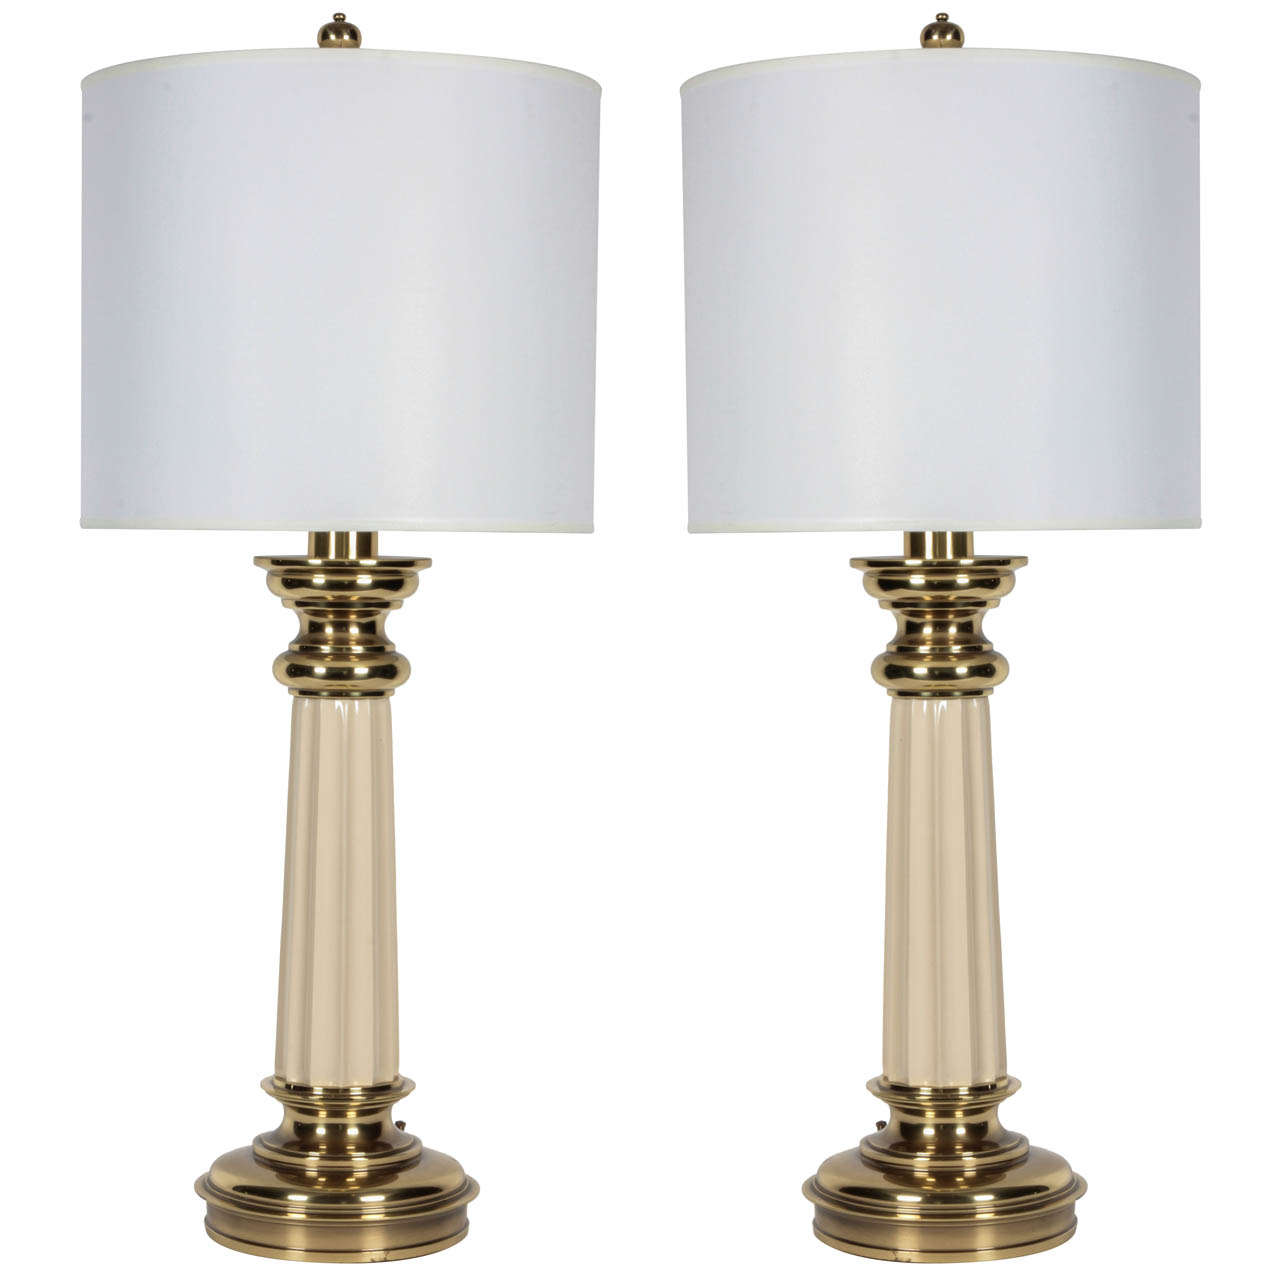 Pair of Brass and Enamel Lamps by Stiffel